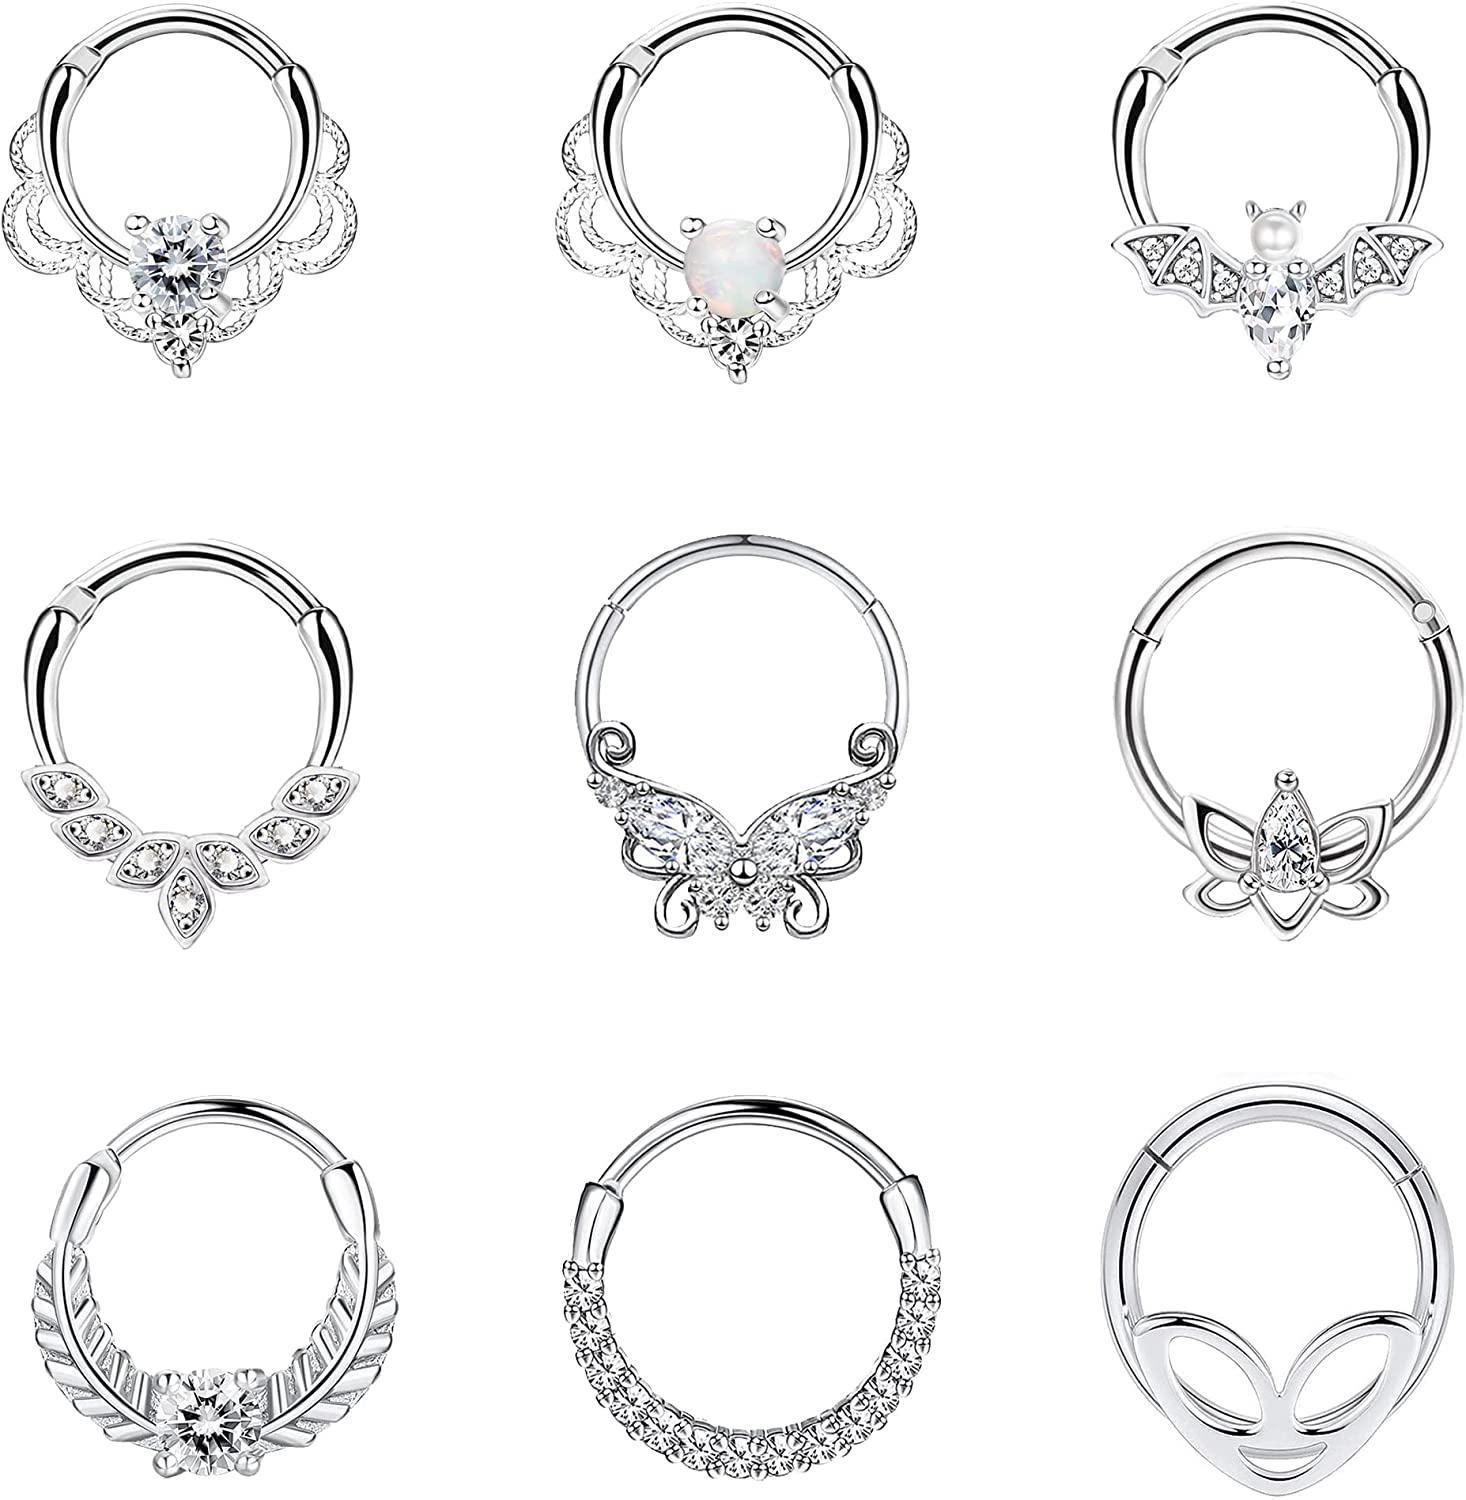 Staligue 9Pcs 16G Septum Clicker Rings Stainless Steel Hoop Hinged Segment CZ Opal Nose Rings for Women Cartilage Tragus Hoop Helix Daith Earrings Nose Piercing Jewelry 8MM